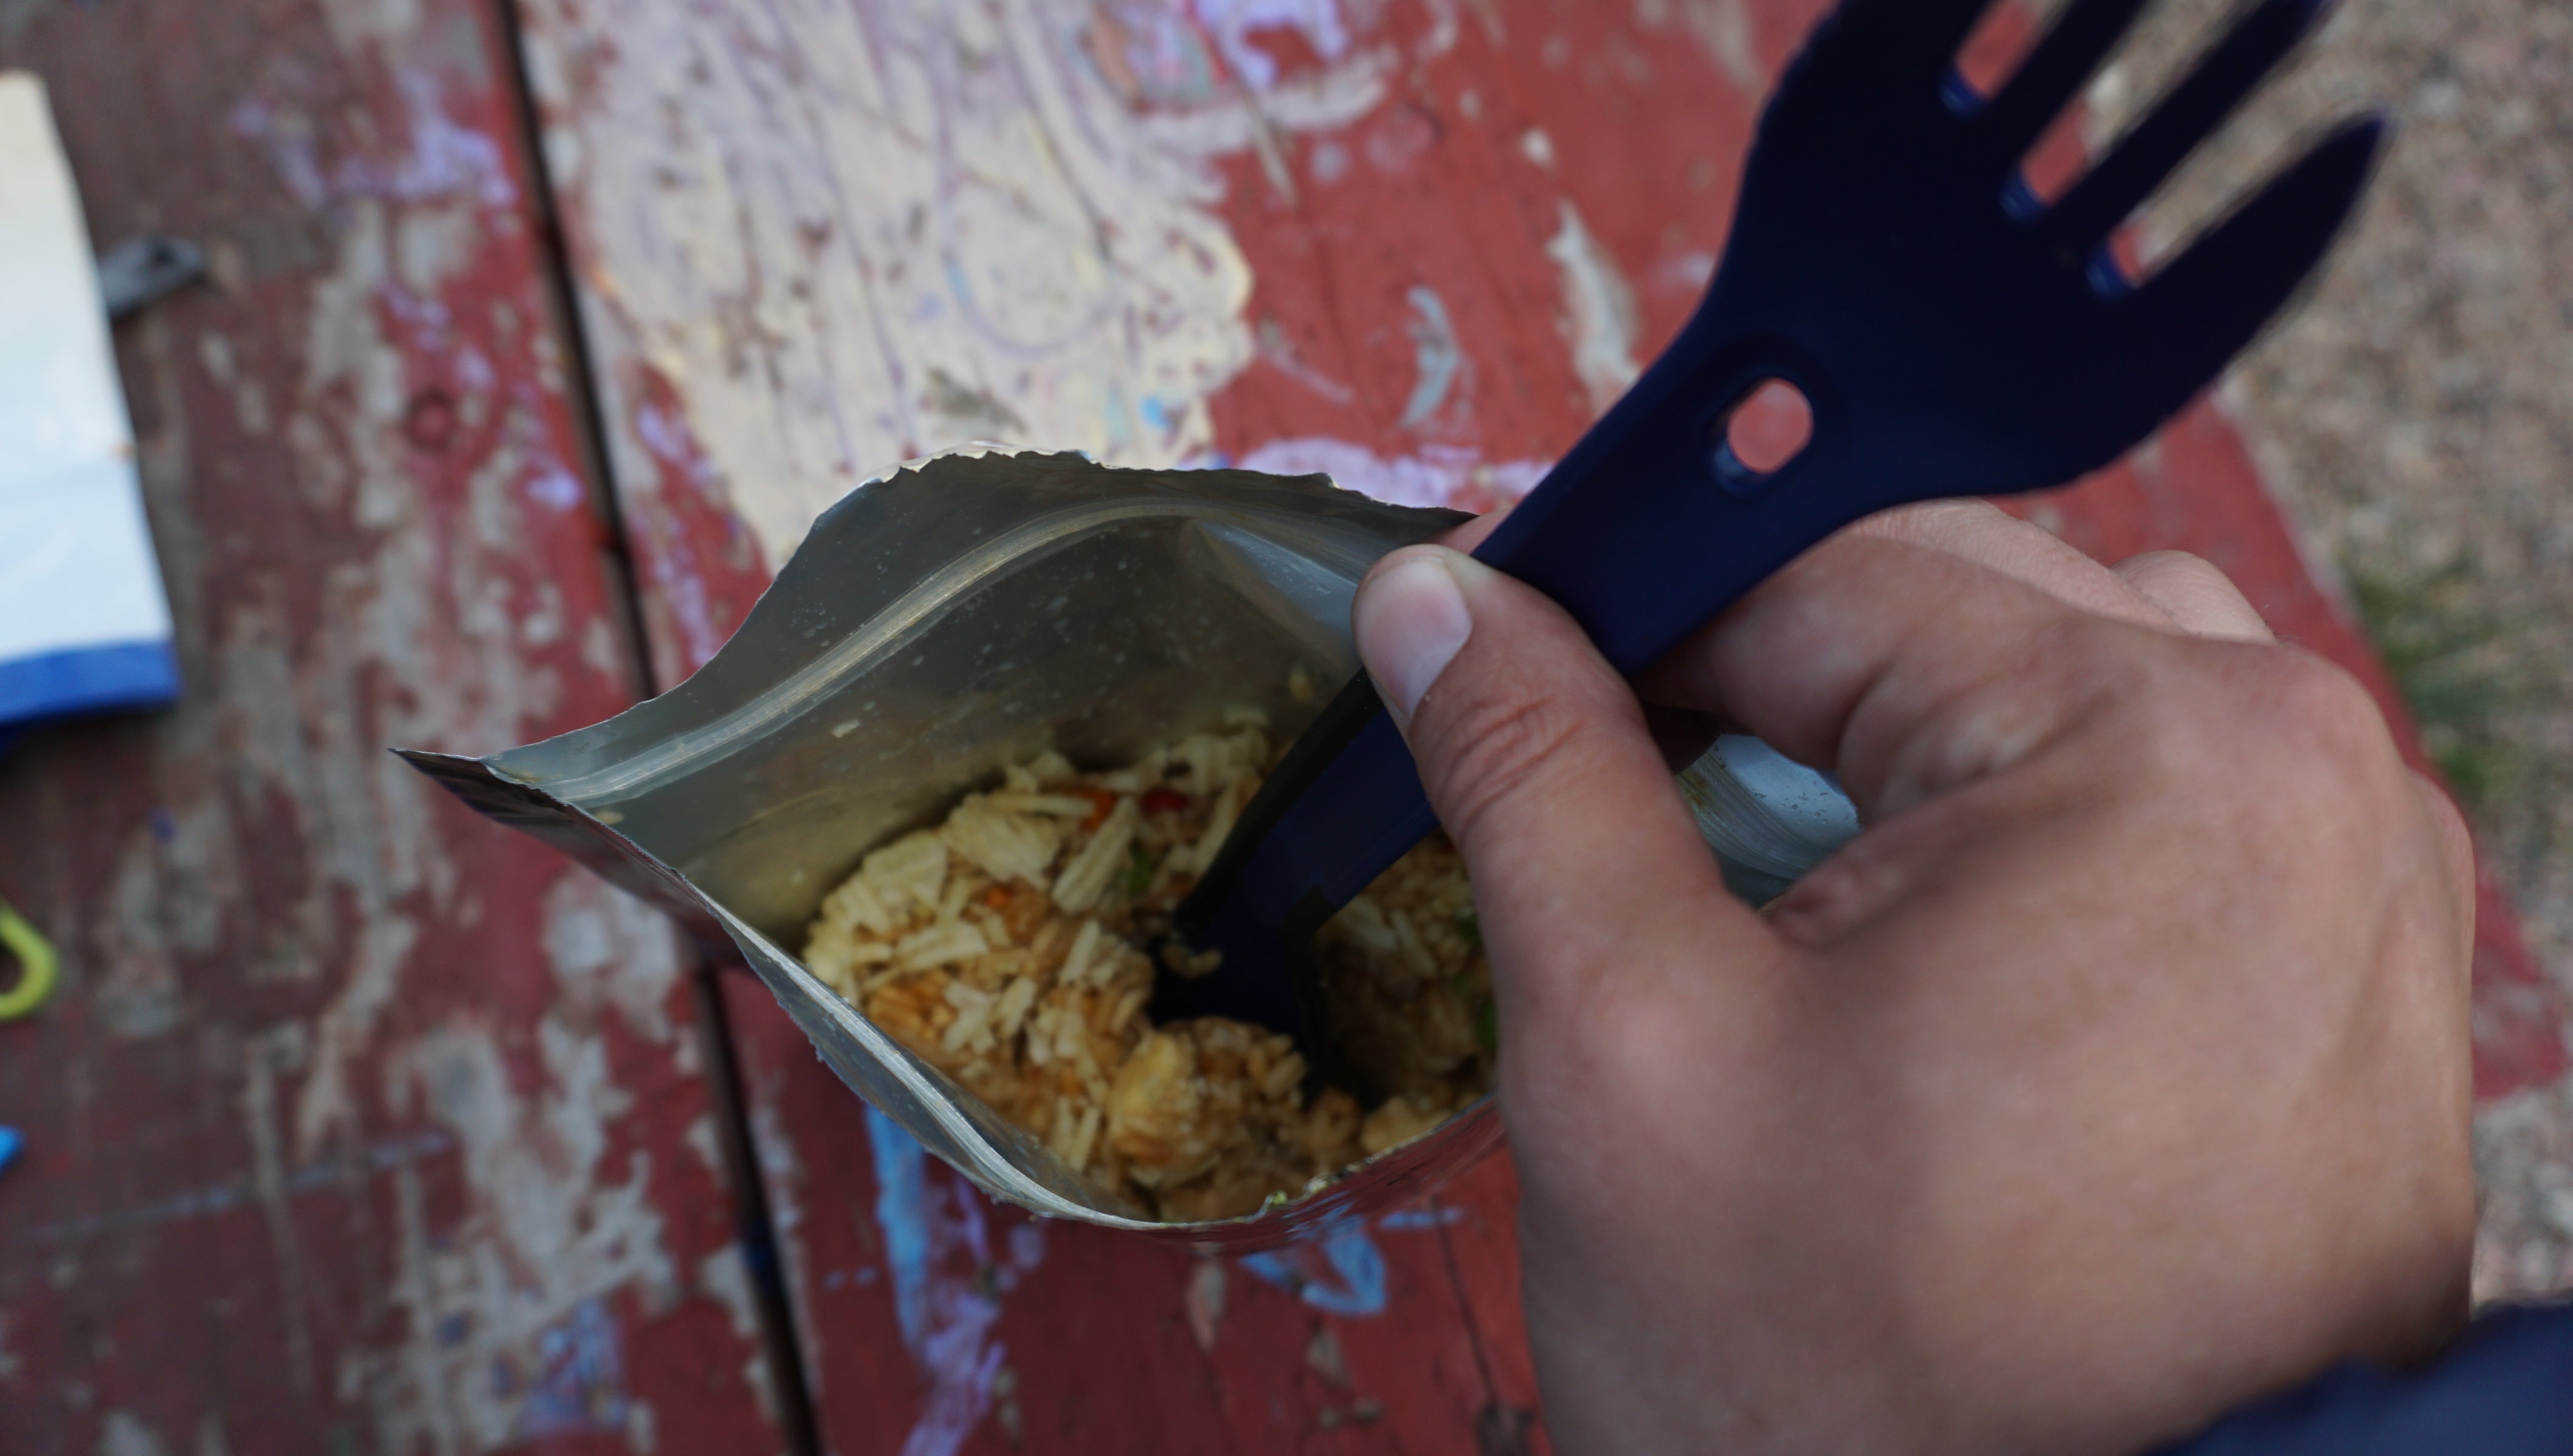 Morsel Spork XL is long enough that when it's fully in a rehydrated meal bag, i can use it without my hands rubbing against the inside of the bag and getting covered in food.